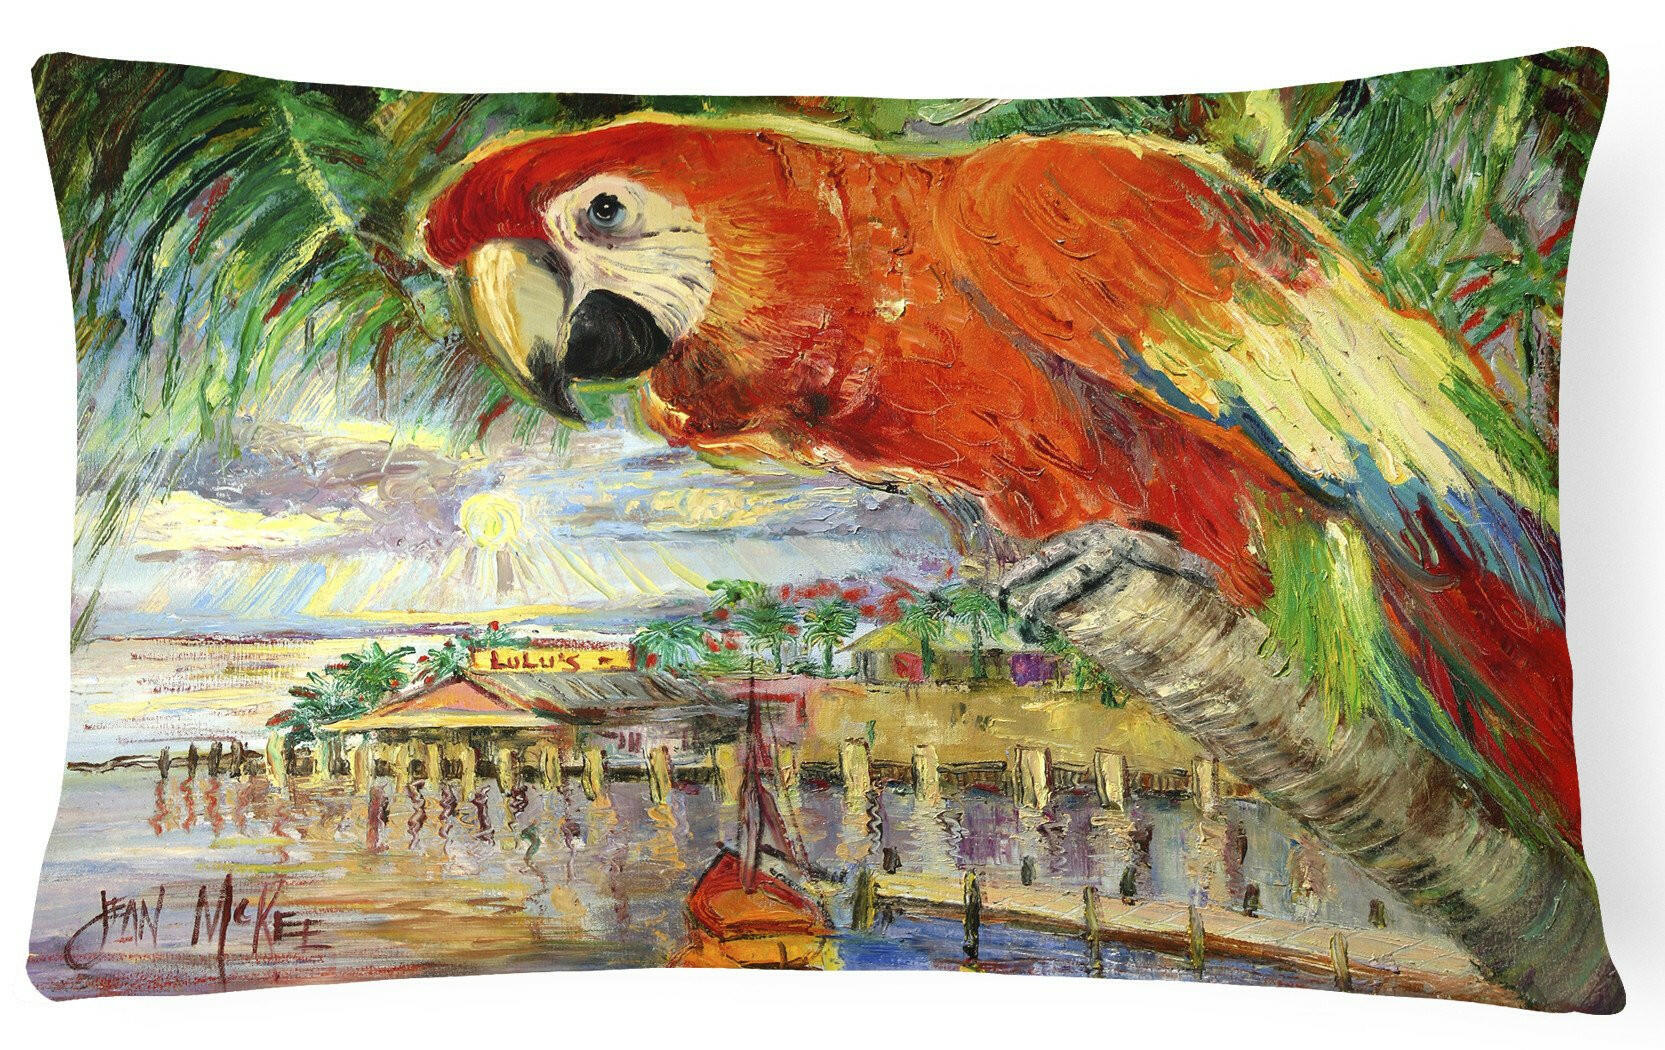 Red Parrot at Lulu's Canvas Fabric Decorative Pillow JMK1134PW1216 by Caroline's Treasures